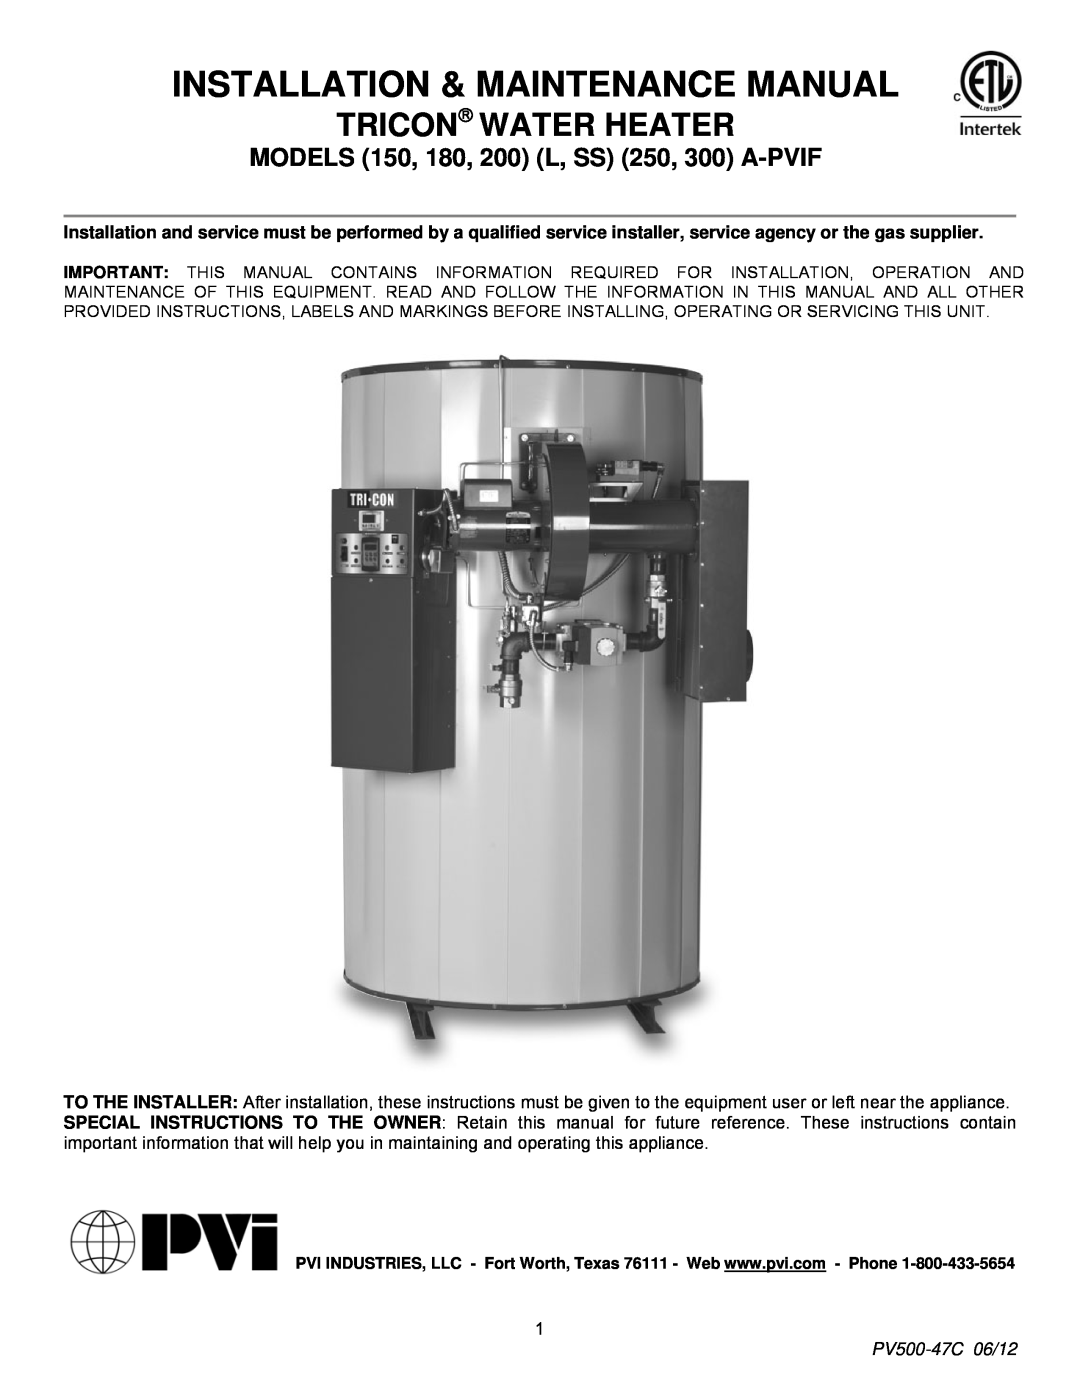 PVI Industries manual Installation & Maintenance Manual, Tricon Water Heater, PV500-47C06/12 